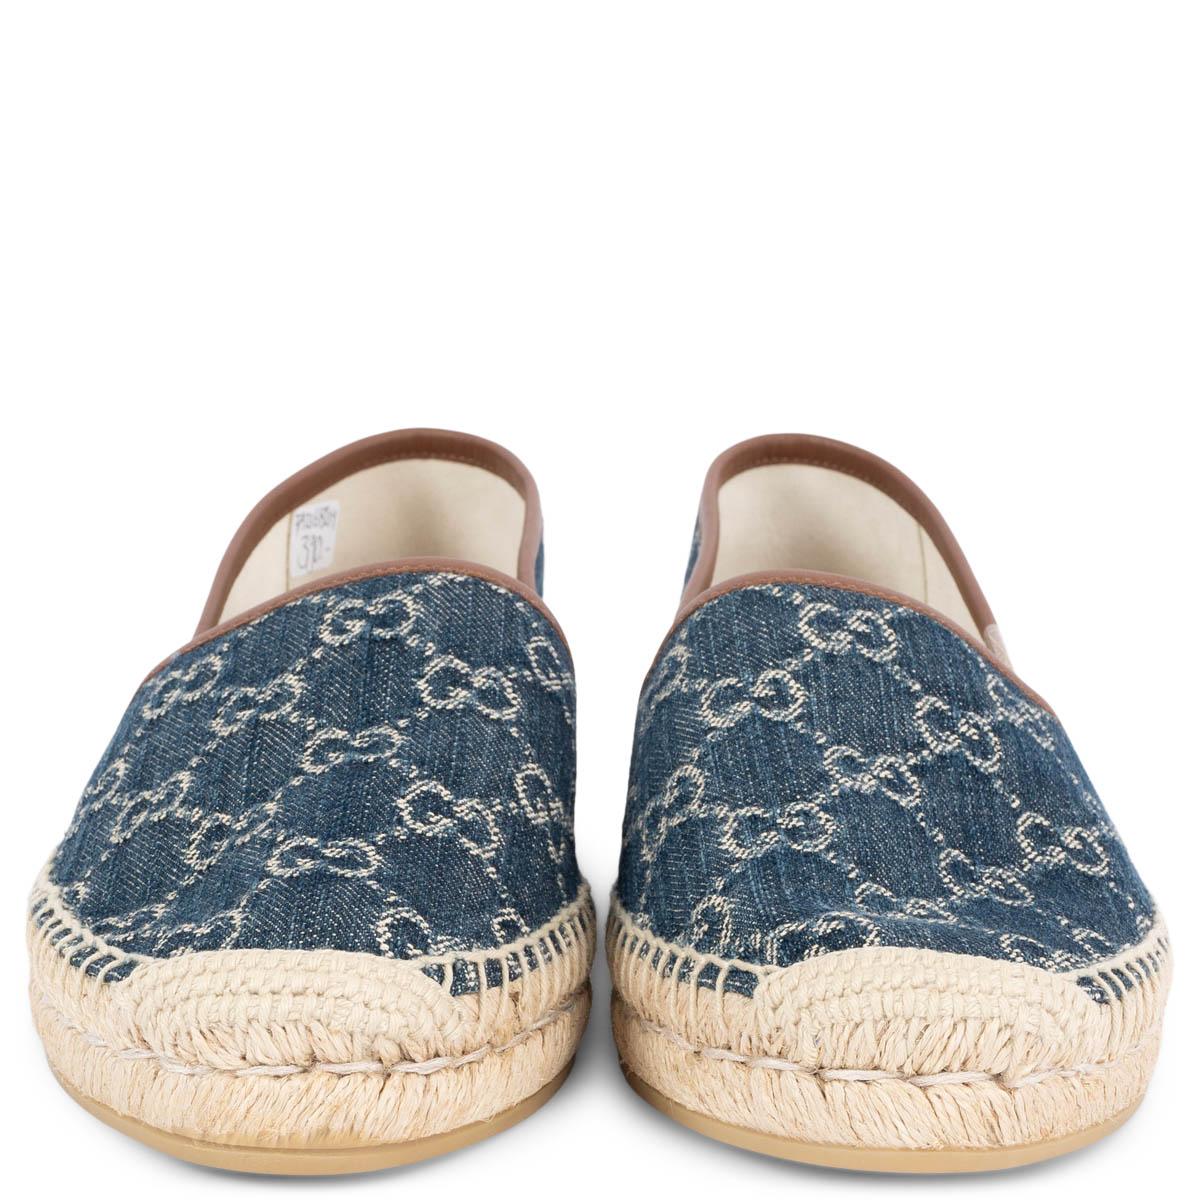 100% authentic Gucci Pilar slip on espadrilles in navy blue and ivory GG Supreme eco-washed organic jacquard denim. Features brown leather trim, braided jute detail at sole edge and rubber soles. Brand new. Come with dust bag.